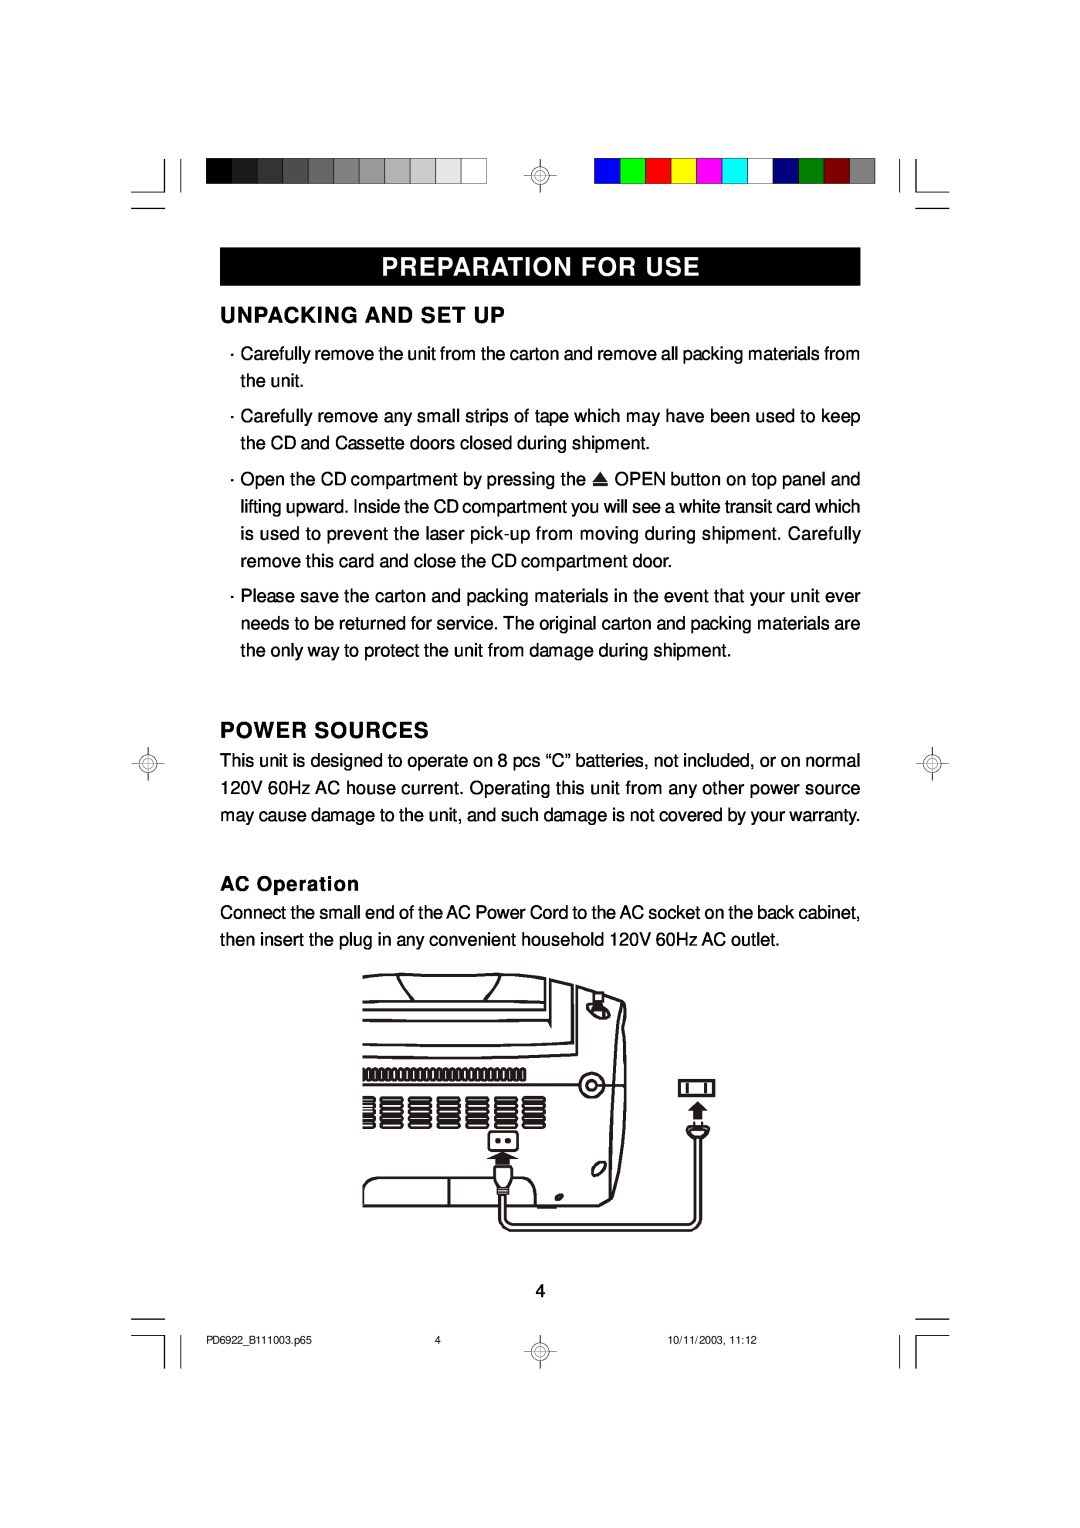 Emerson PD6922 owner manual Preparation For Use, Unpacking And Set Up, Power Sources, AC Operation 